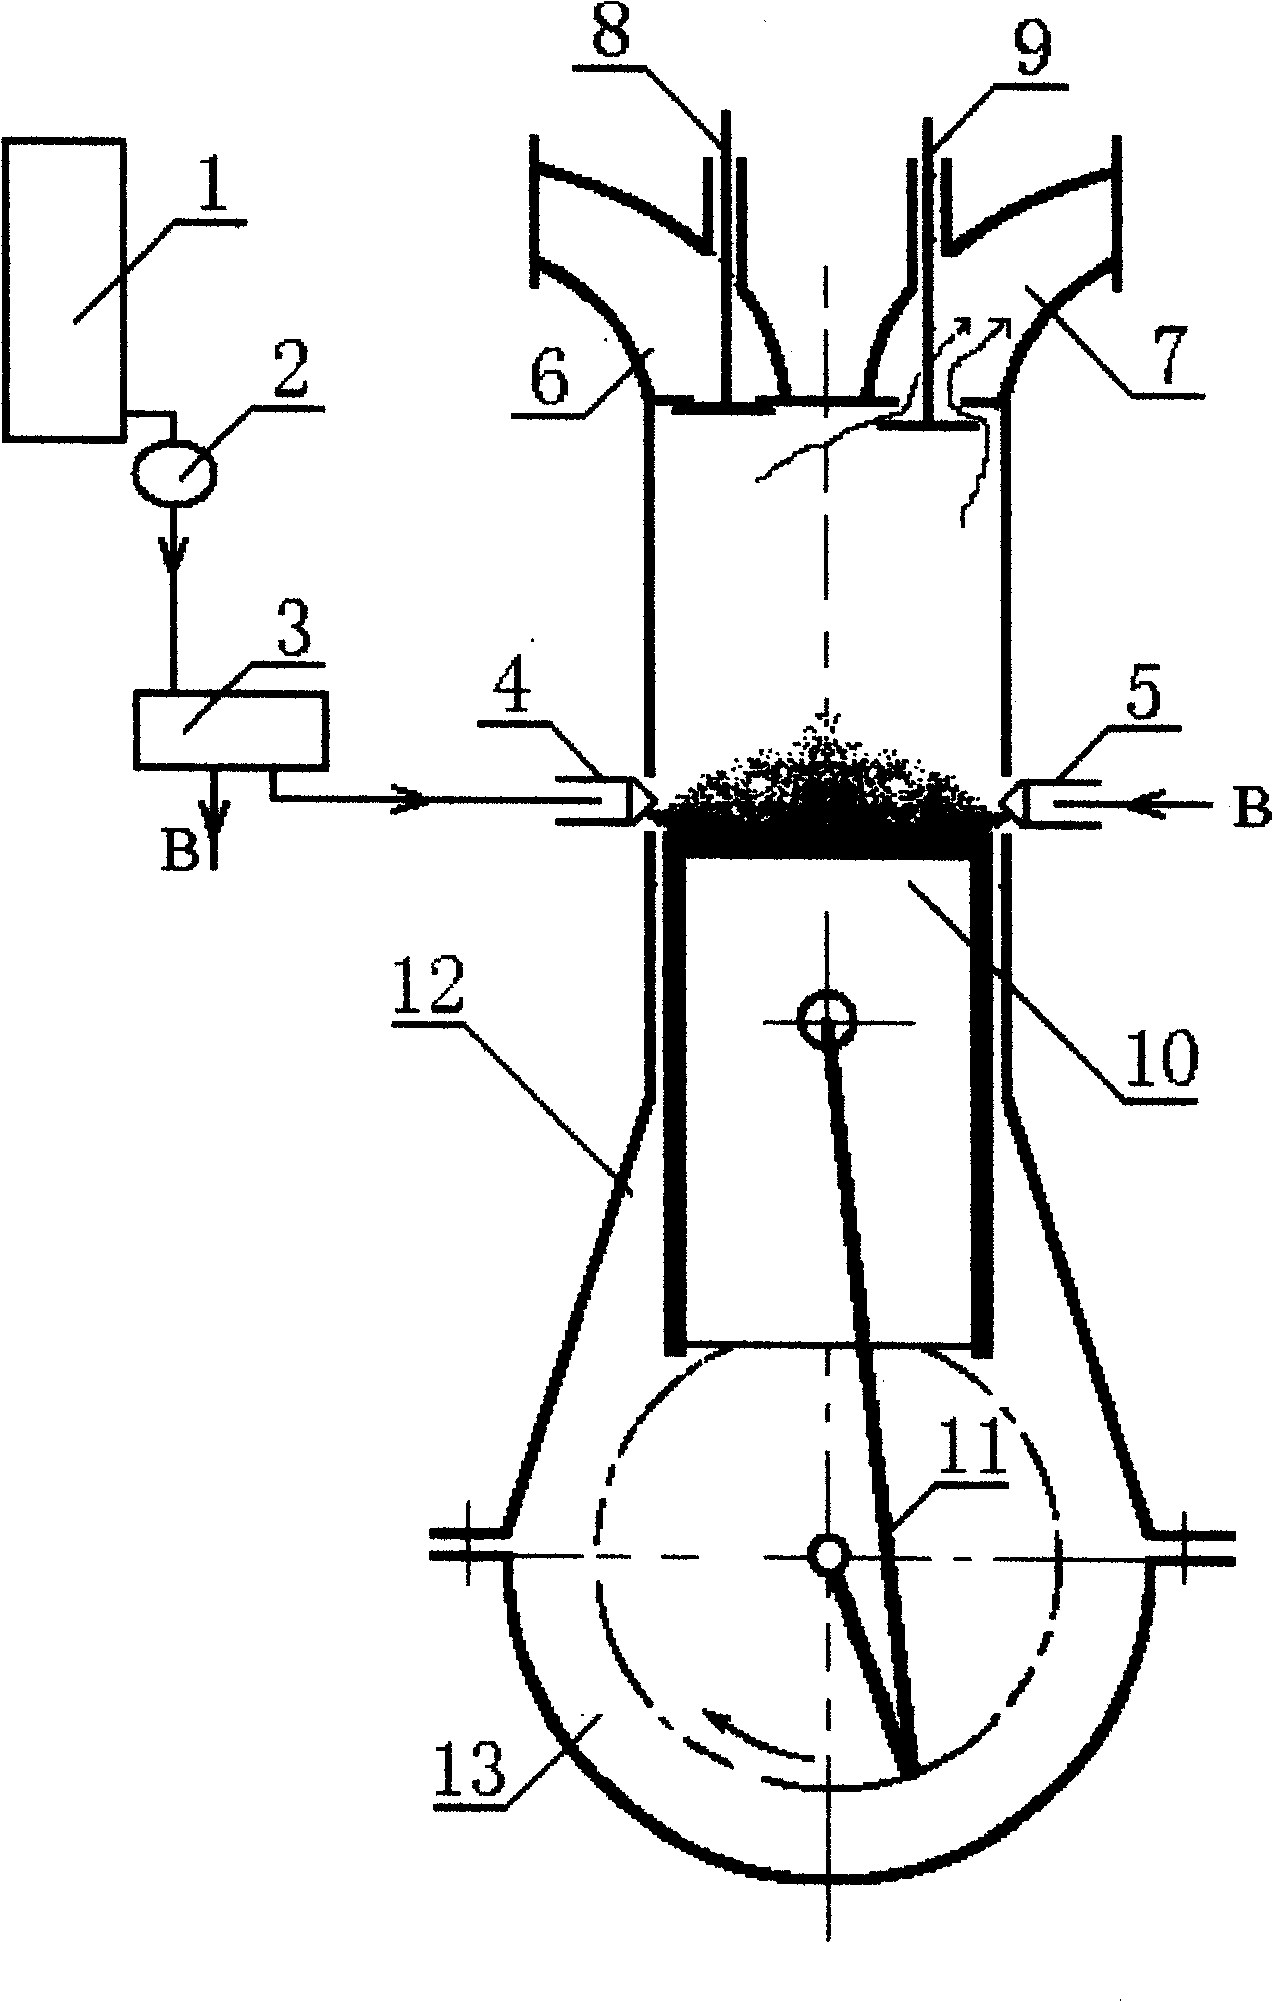 Water-spraying and exhaust-assisting energy-saving and emission-reduction method and device for internal combustion engine